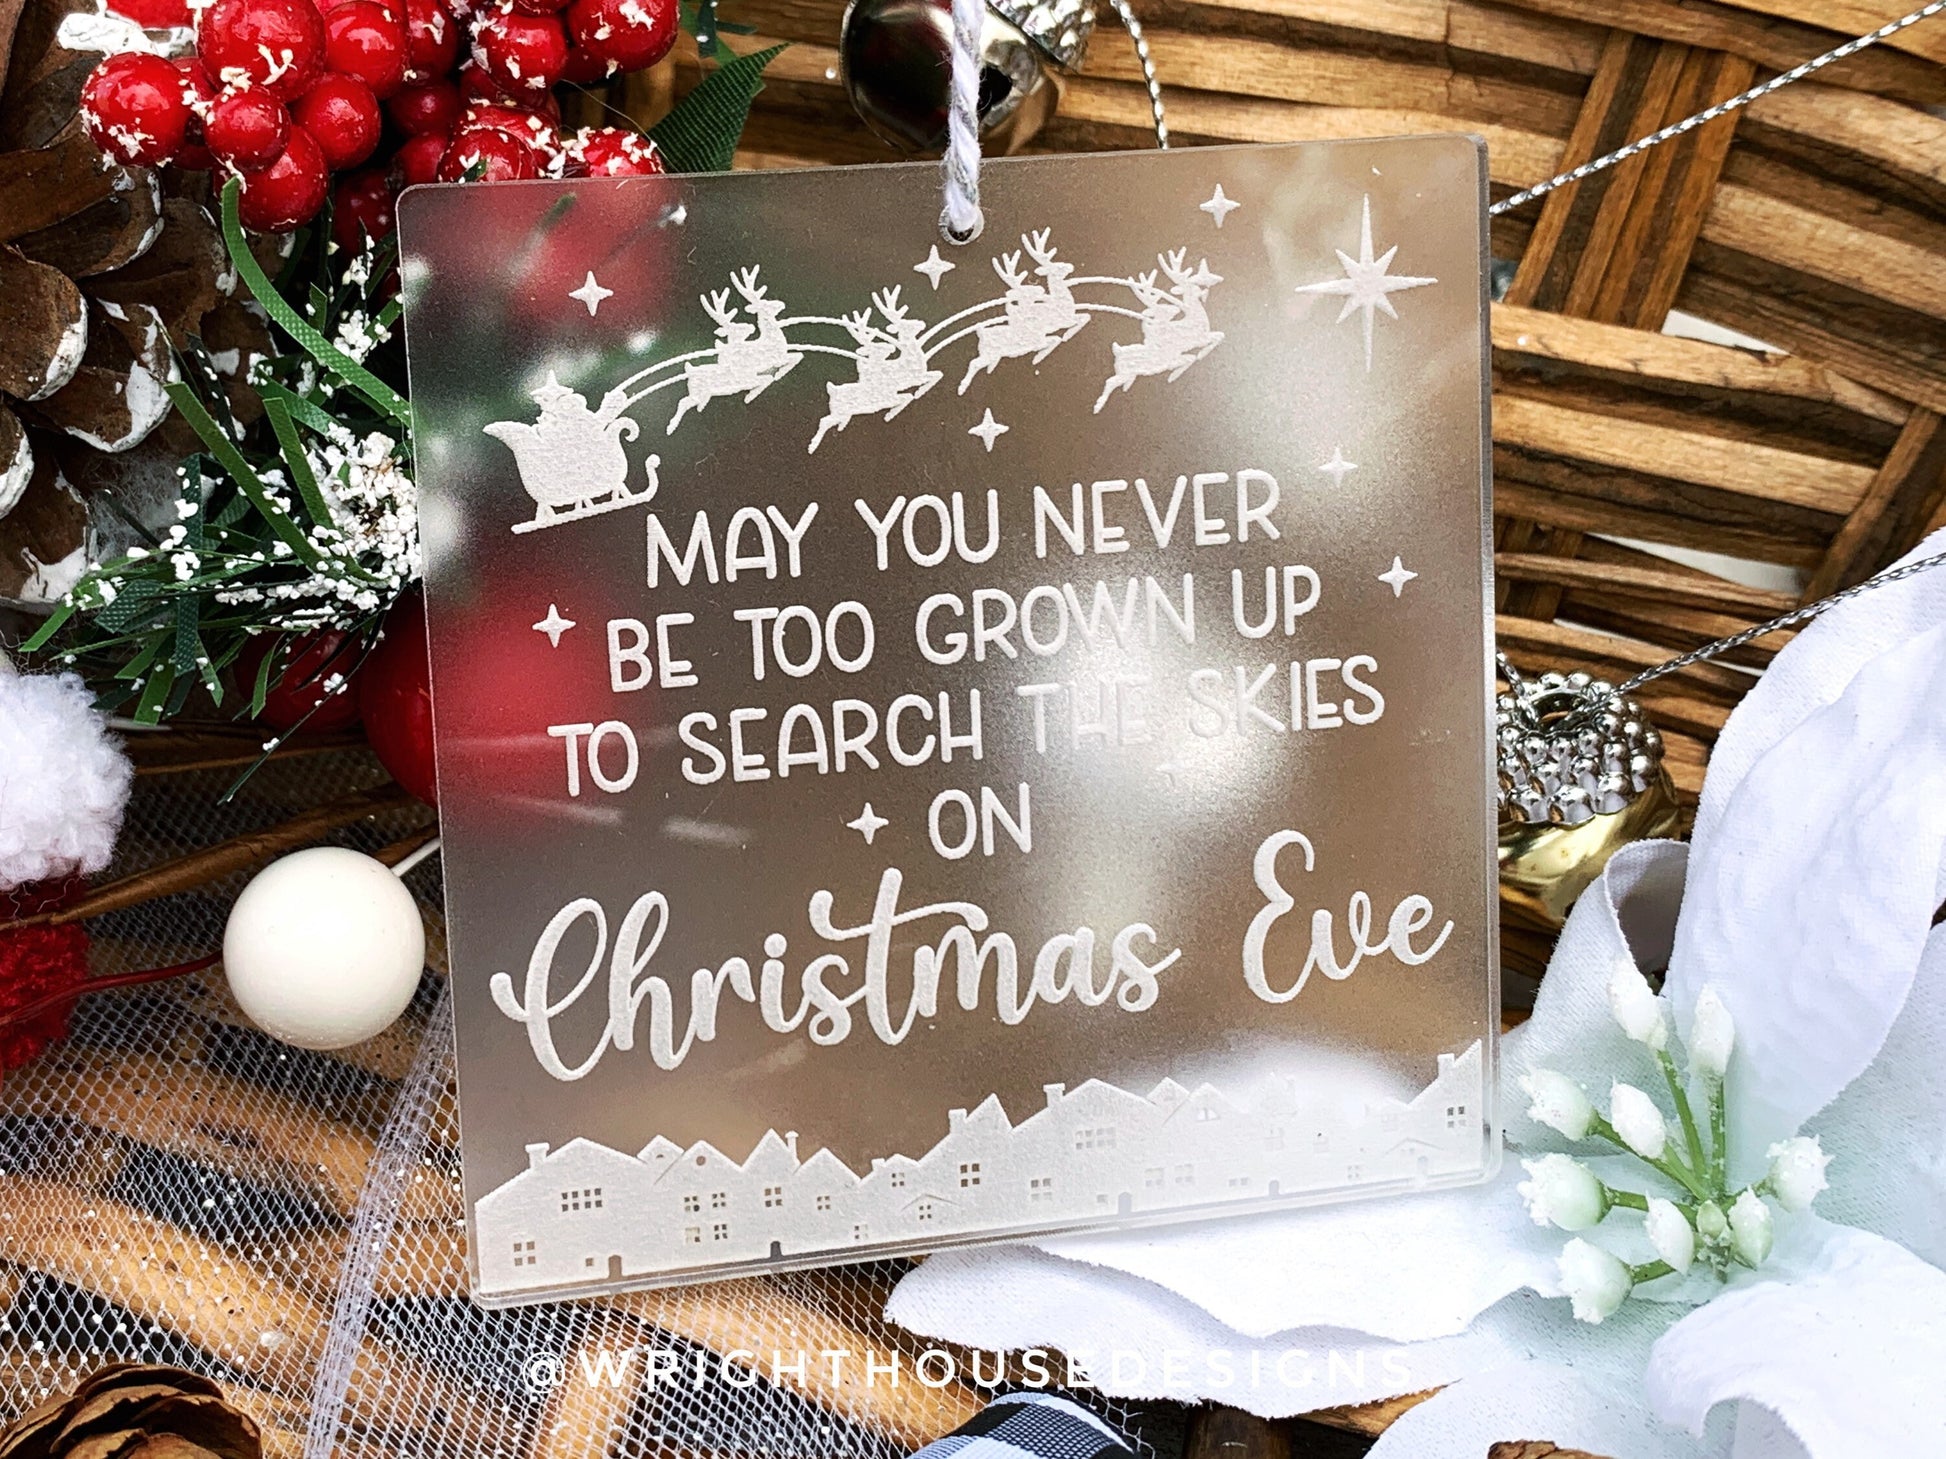 May You Never Be Too Grown Up To Search The Skies On Christmas Eve - Laser Engraved Frosted Acrylic Tree Ornament - Secret Santa Gift